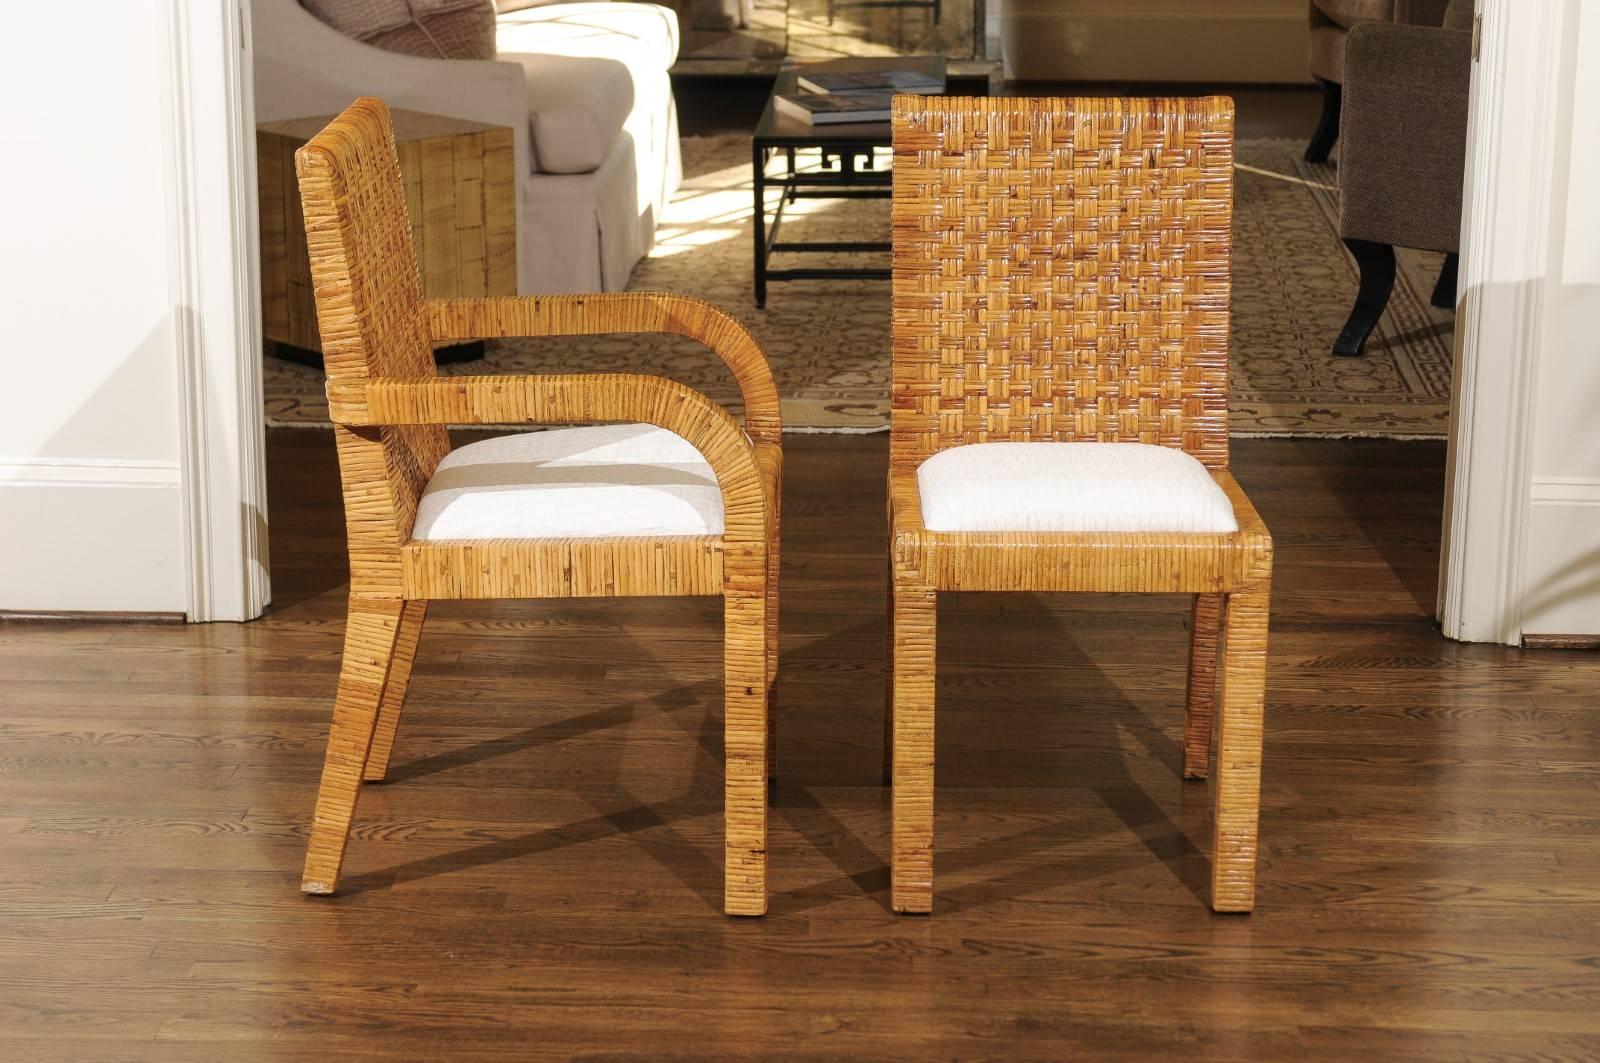 These magnificent dining chairs are shipped as professionally photographed and described in the listing narrative: Meticulously professionally restored and installation ready. Expert custom upholstery service is available.

A killer set of ten (10)